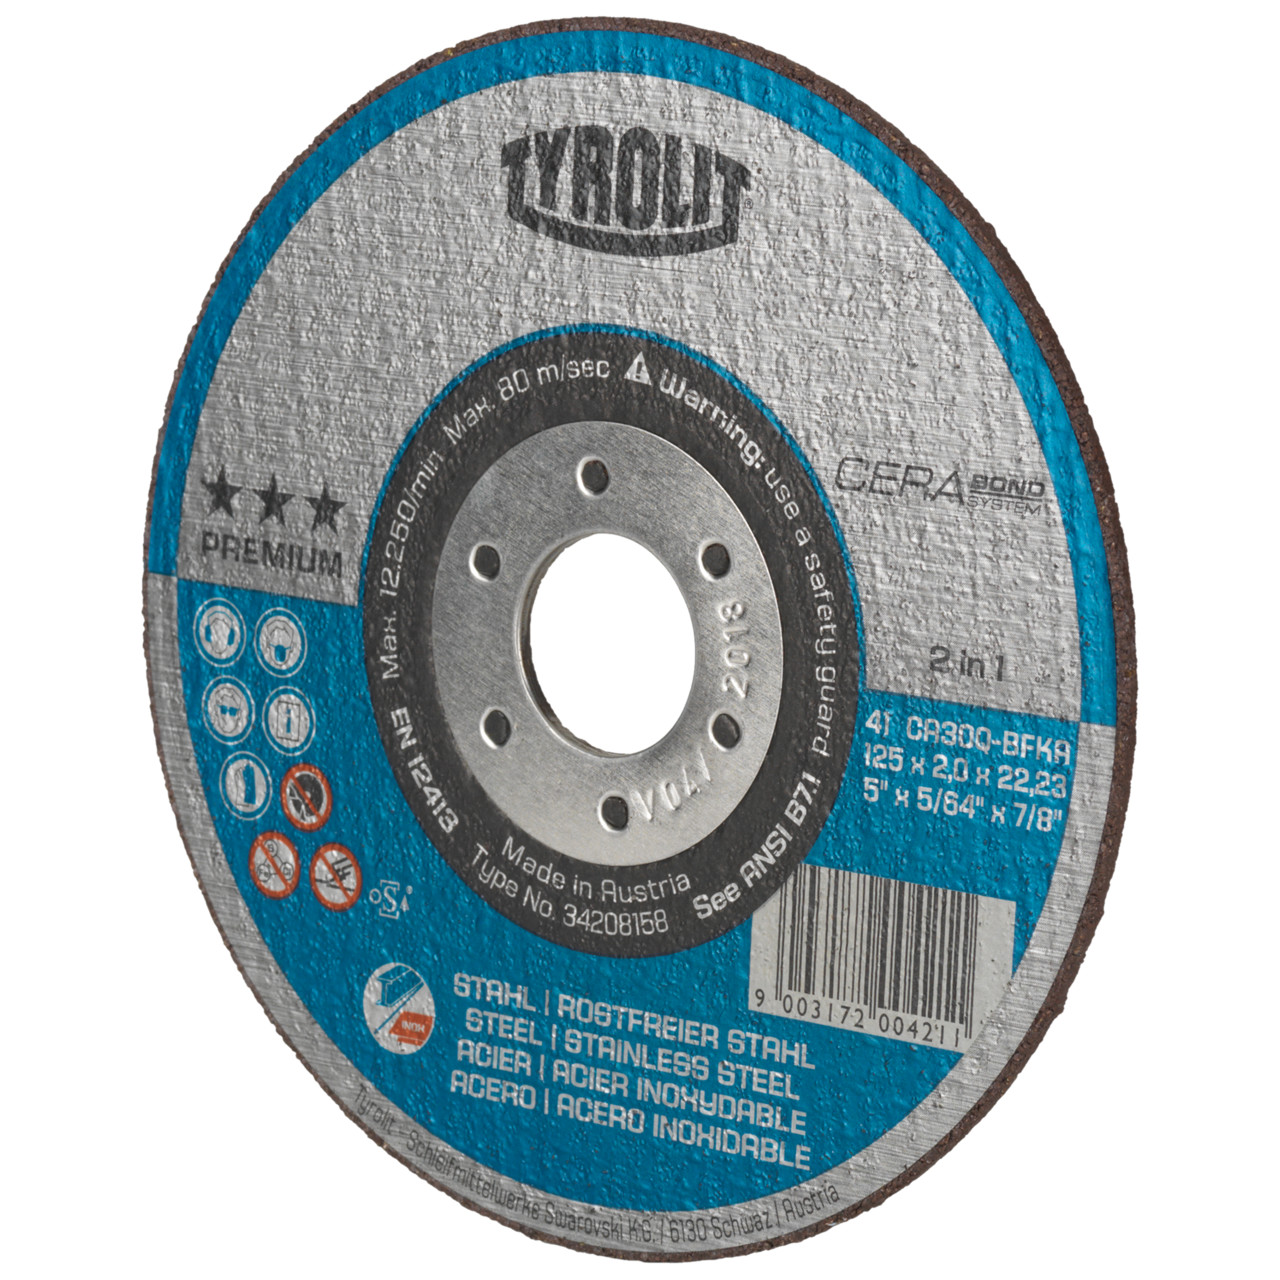 TYROLIT CERABOND Cutting disc DxDxH 115x1.0x22.23 2in1 for steel and stainless steel, shape: 41 - straight version, Art. 34241344